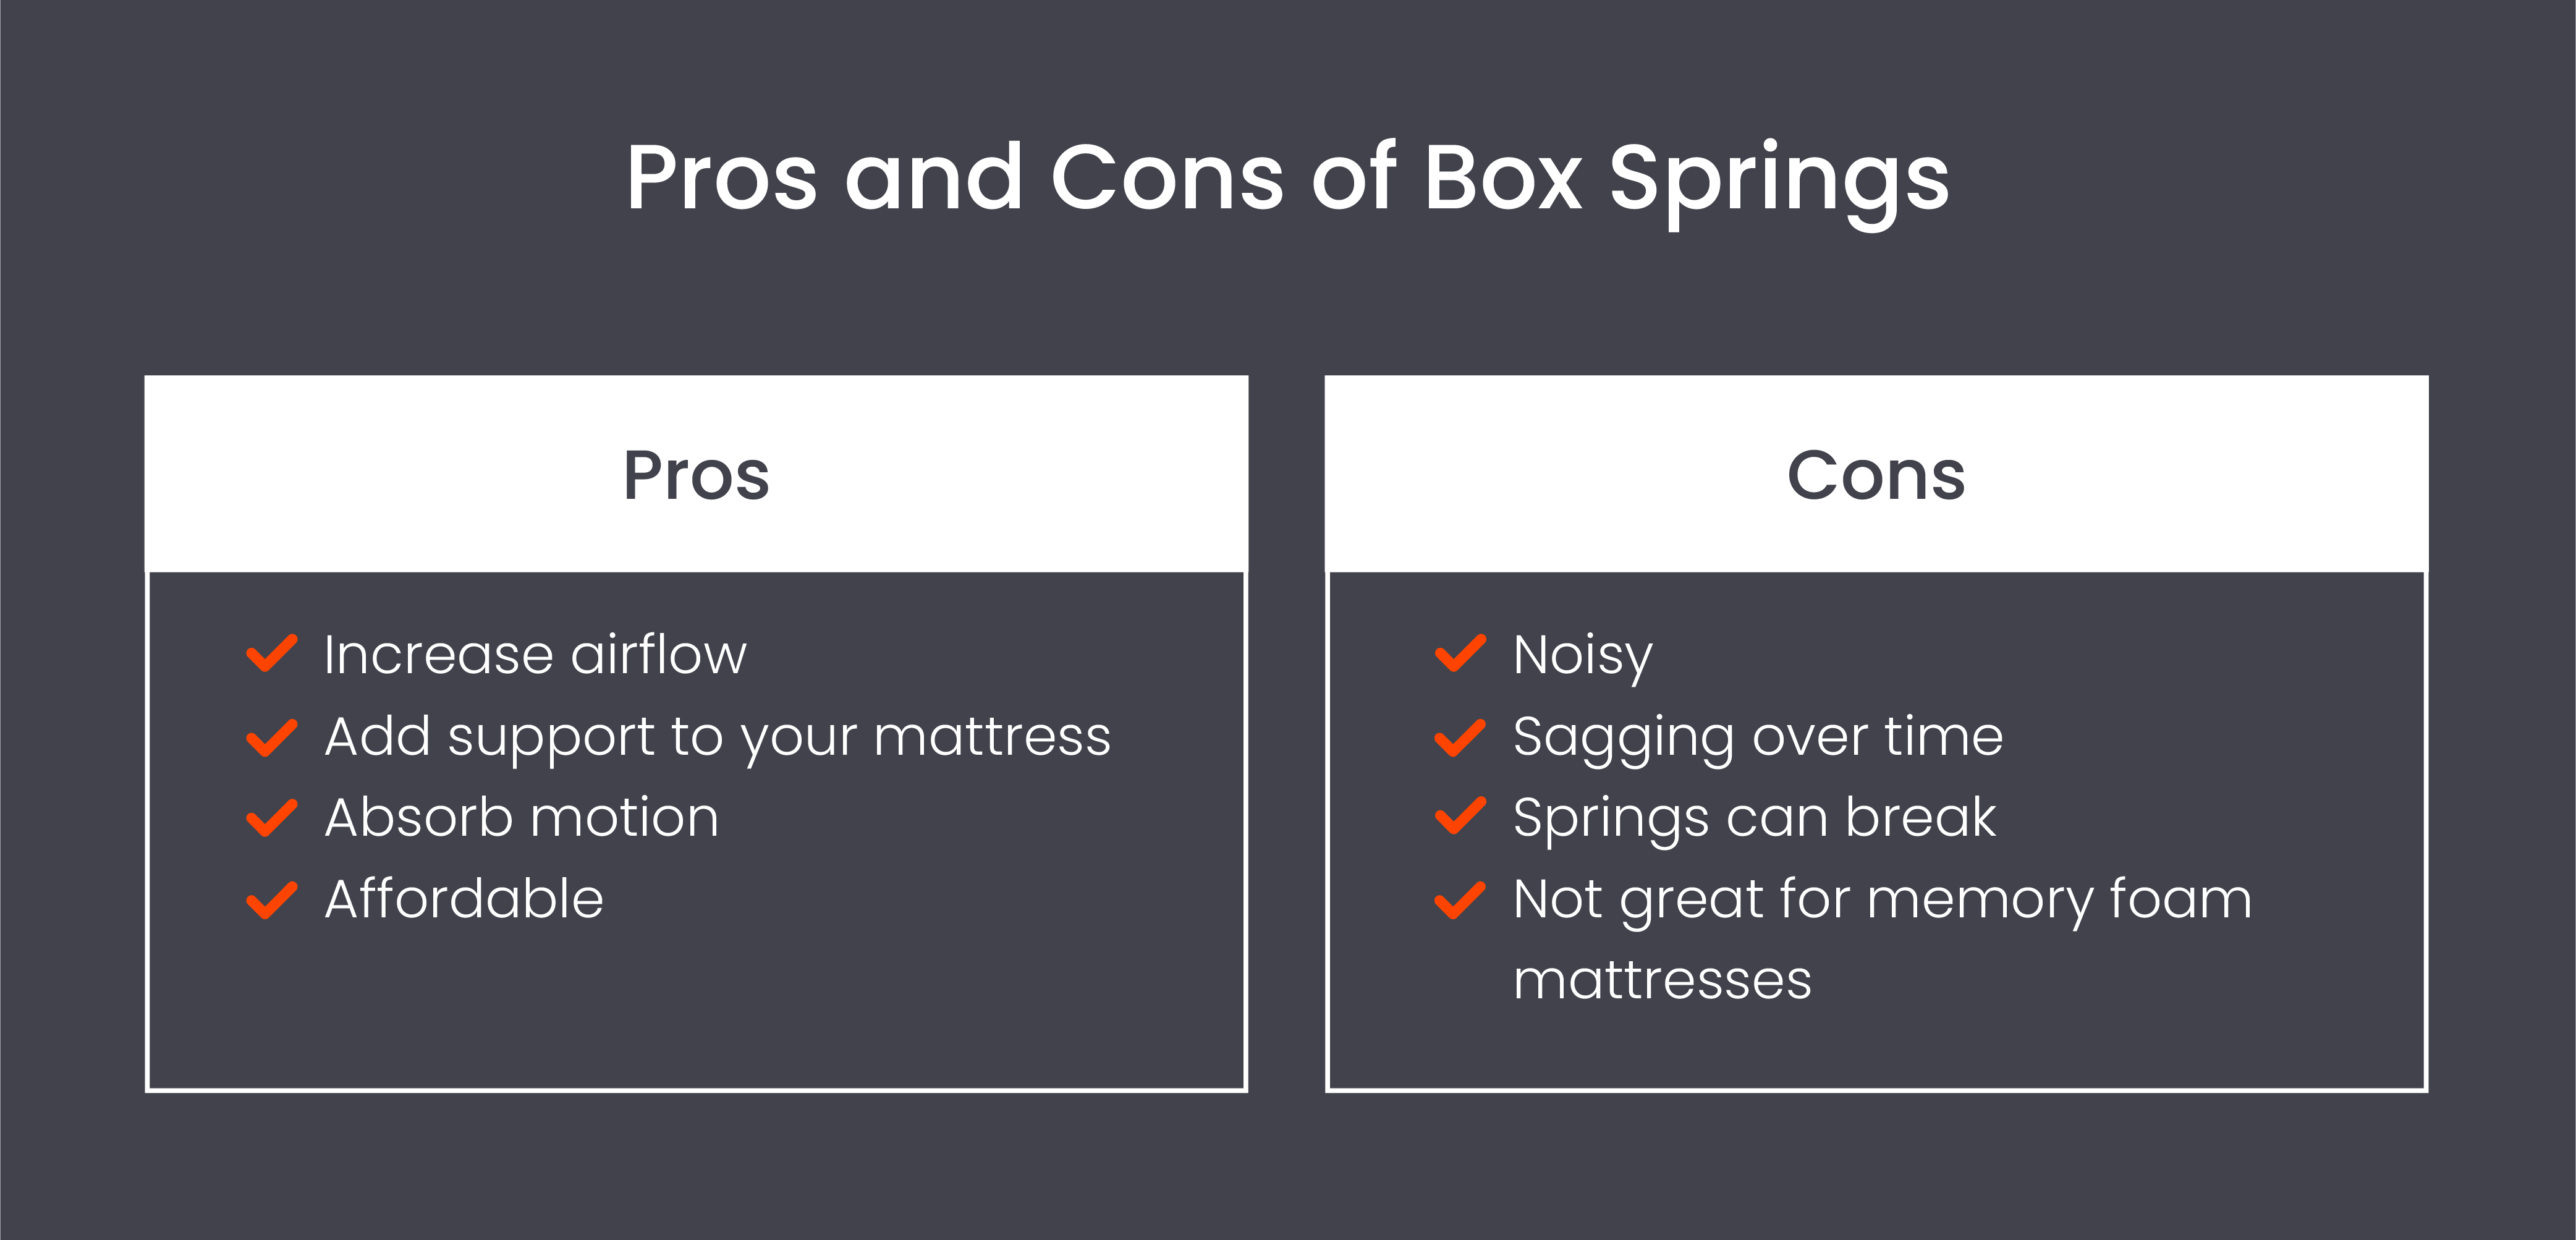 Pros and cons of box springs